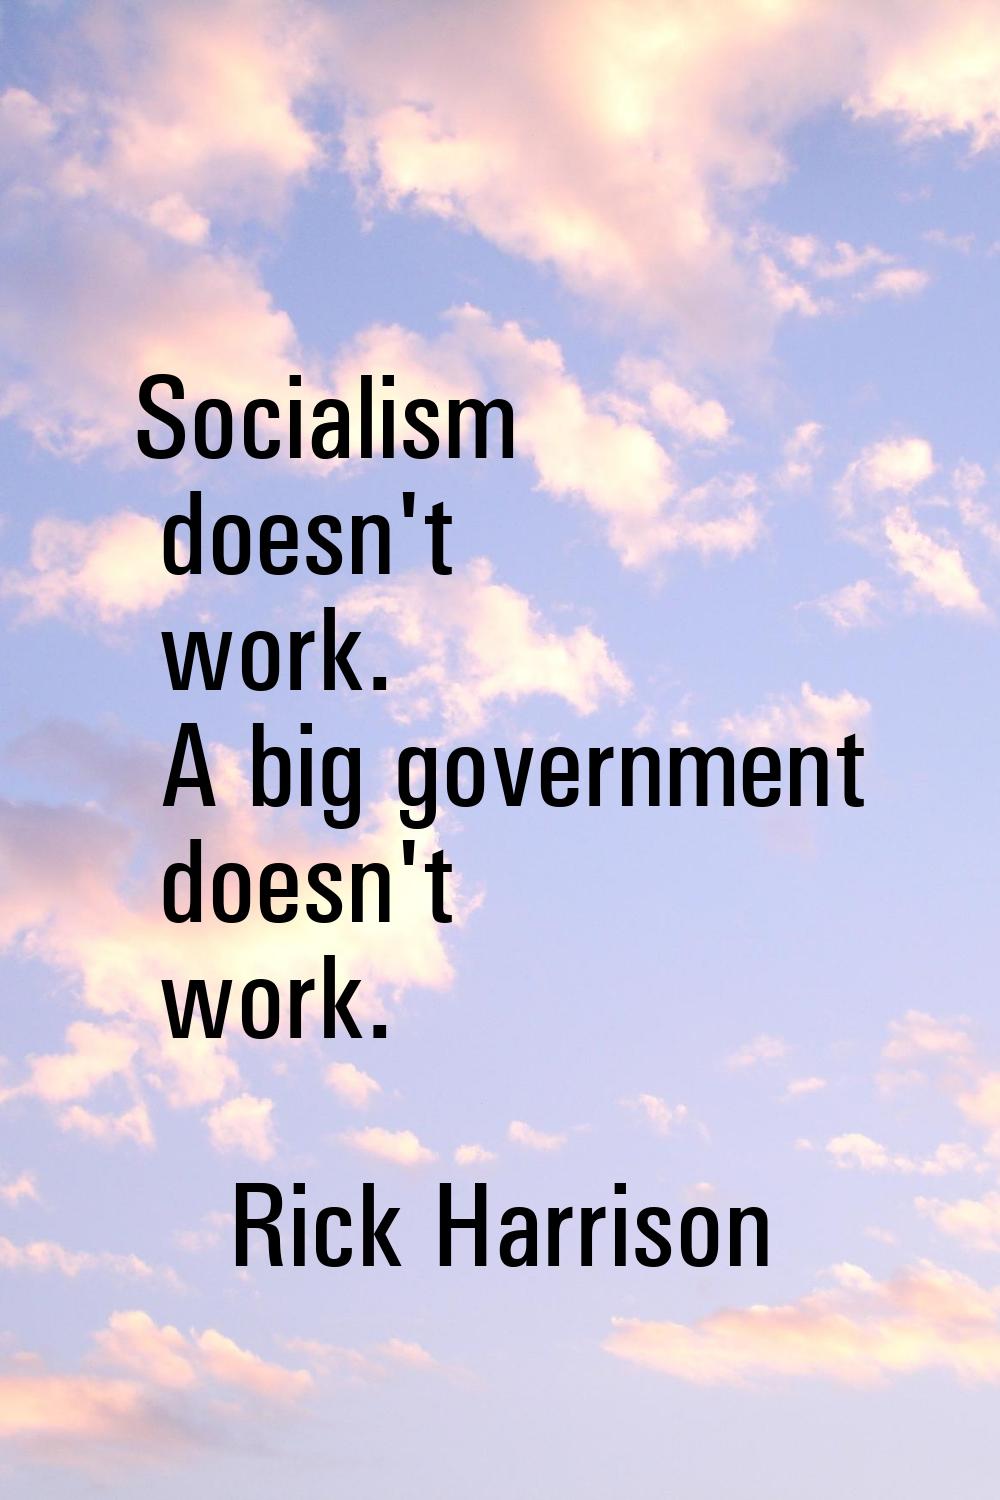 Socialism doesn't work. A big government doesn't work.